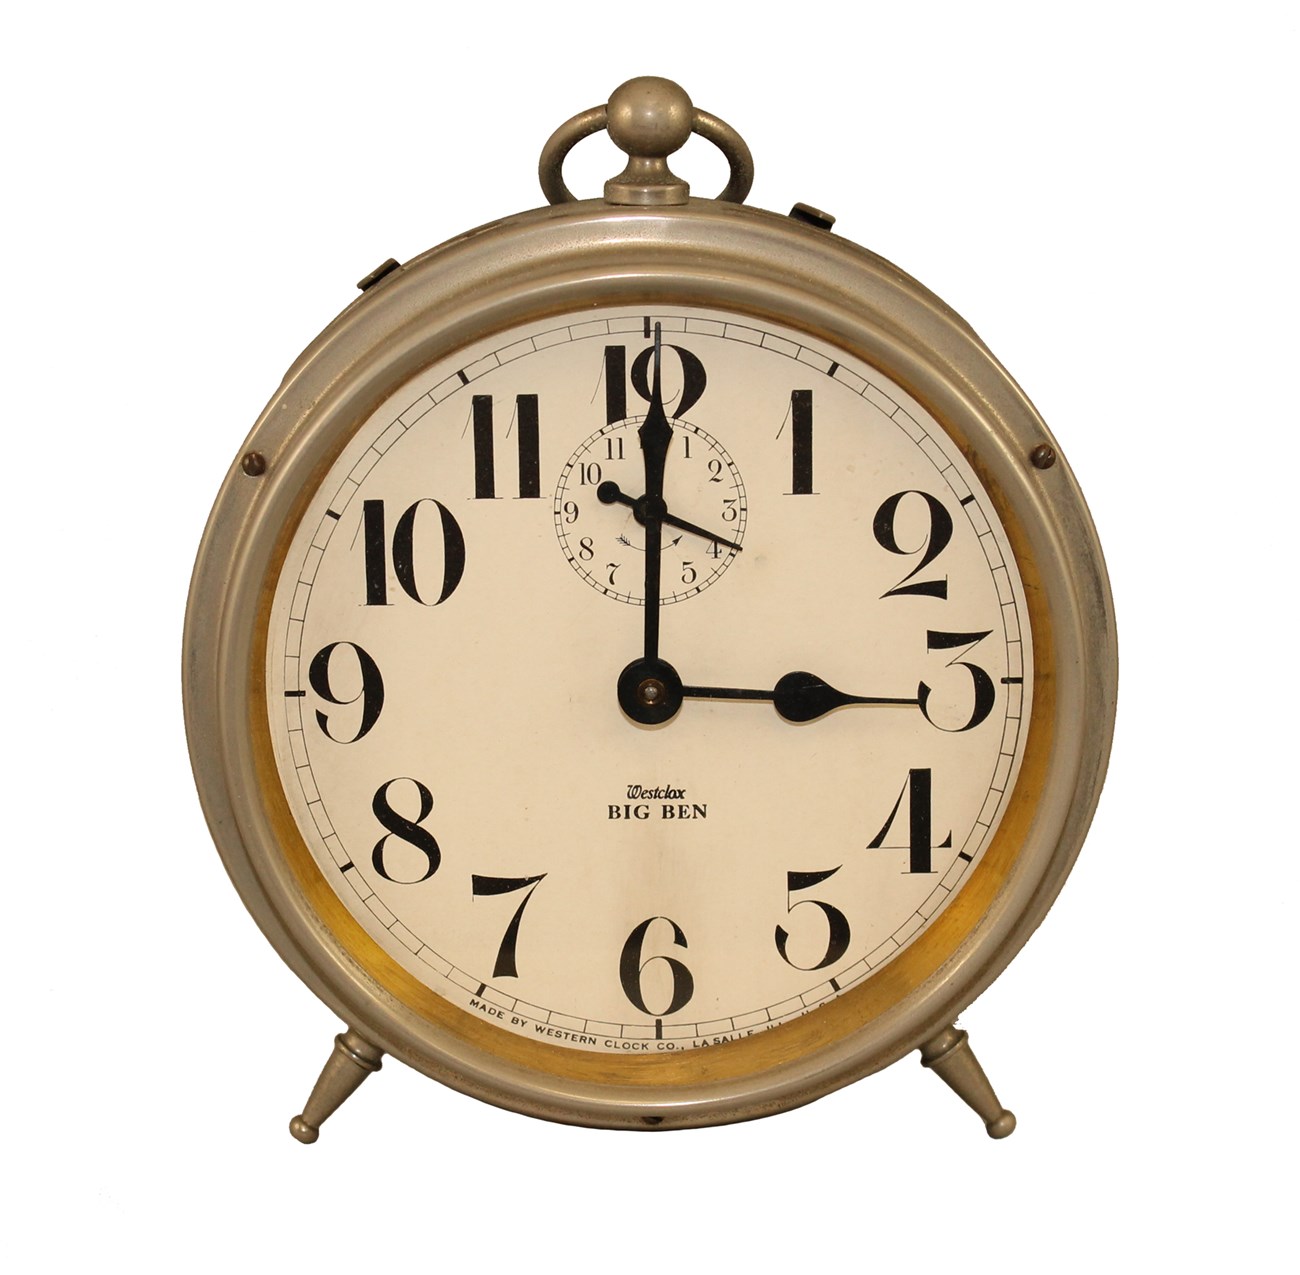 Clock with Arabic numerals on face set to 3:00, with small dial under 12 repeating 1 to 12 with single hand